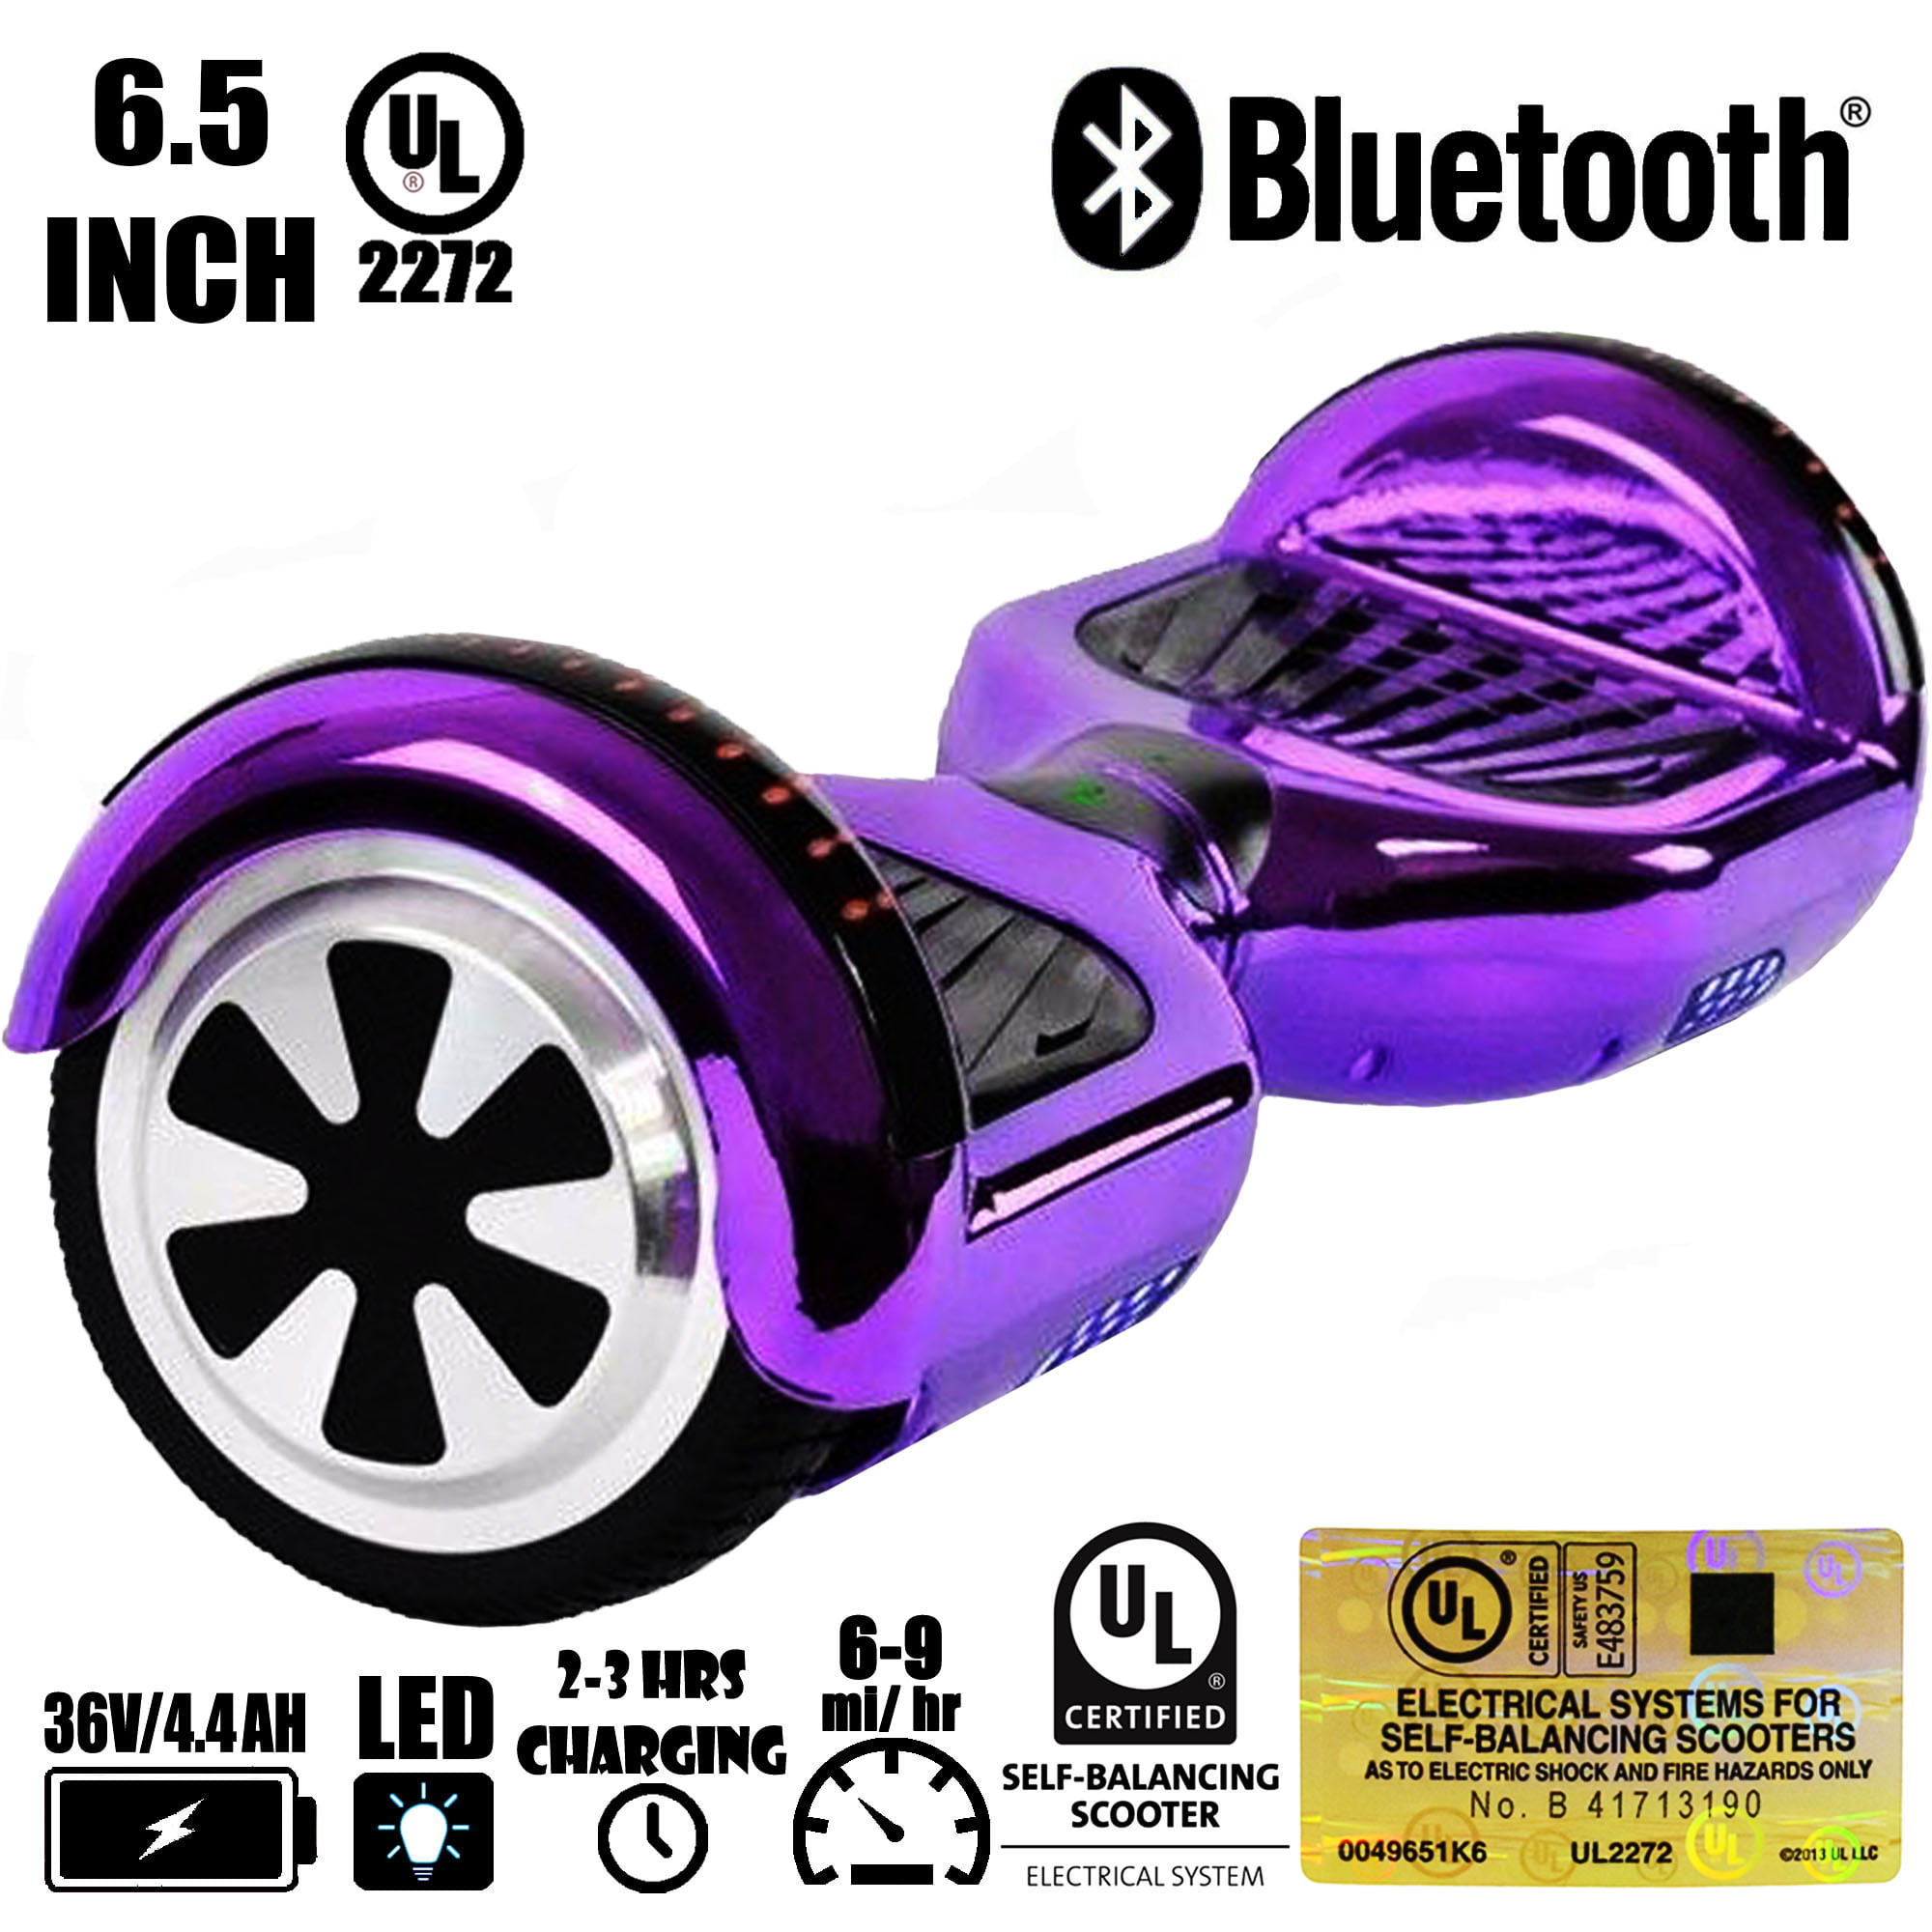 6.5" Hoverboard Bluetooth Wheel Electric Self Balance Scooter Bag Chrome Purple 